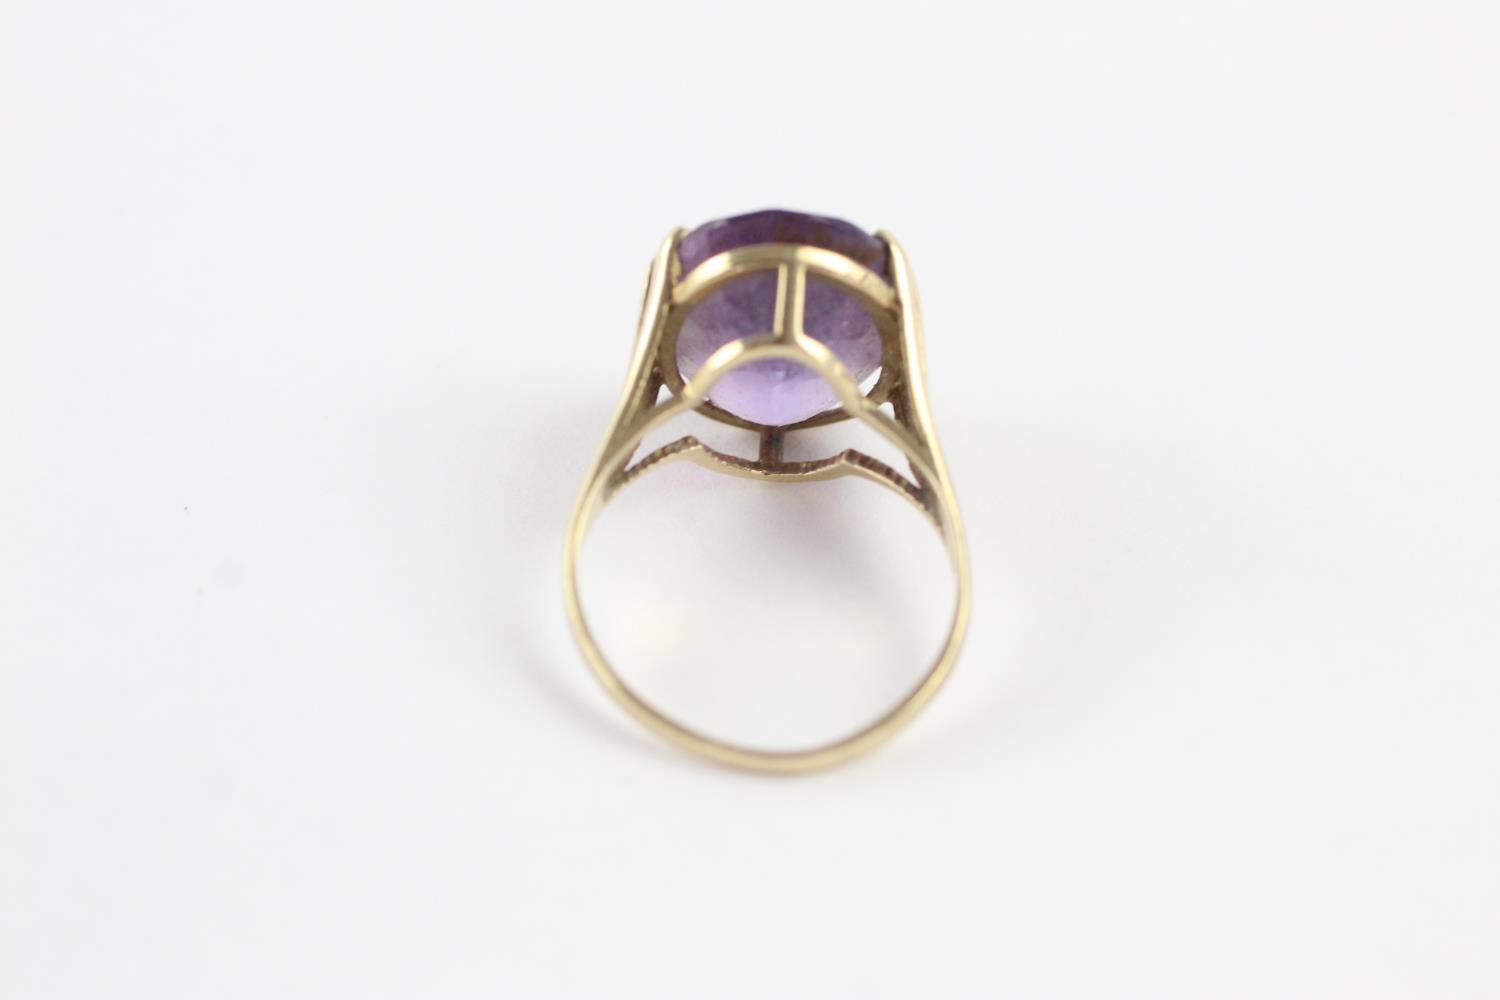 9ct gold amethyst high profile setting cocktail ring (3.8g) size O - Image 5 of 9